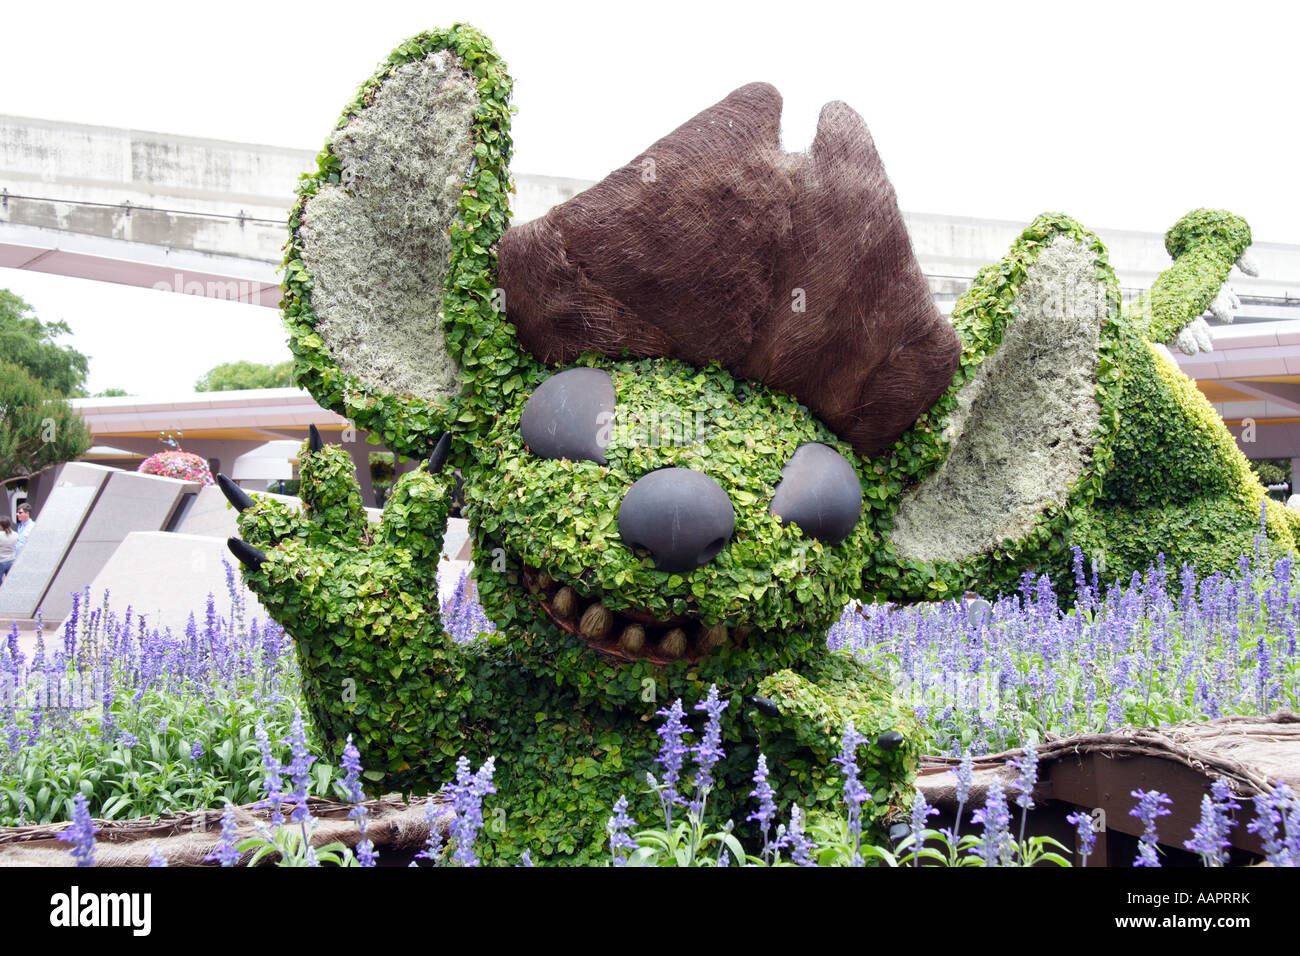 Stitch made from plants at the entry of Epcot, a theme park that is part of the Walt Disney World Resort Stock Photo